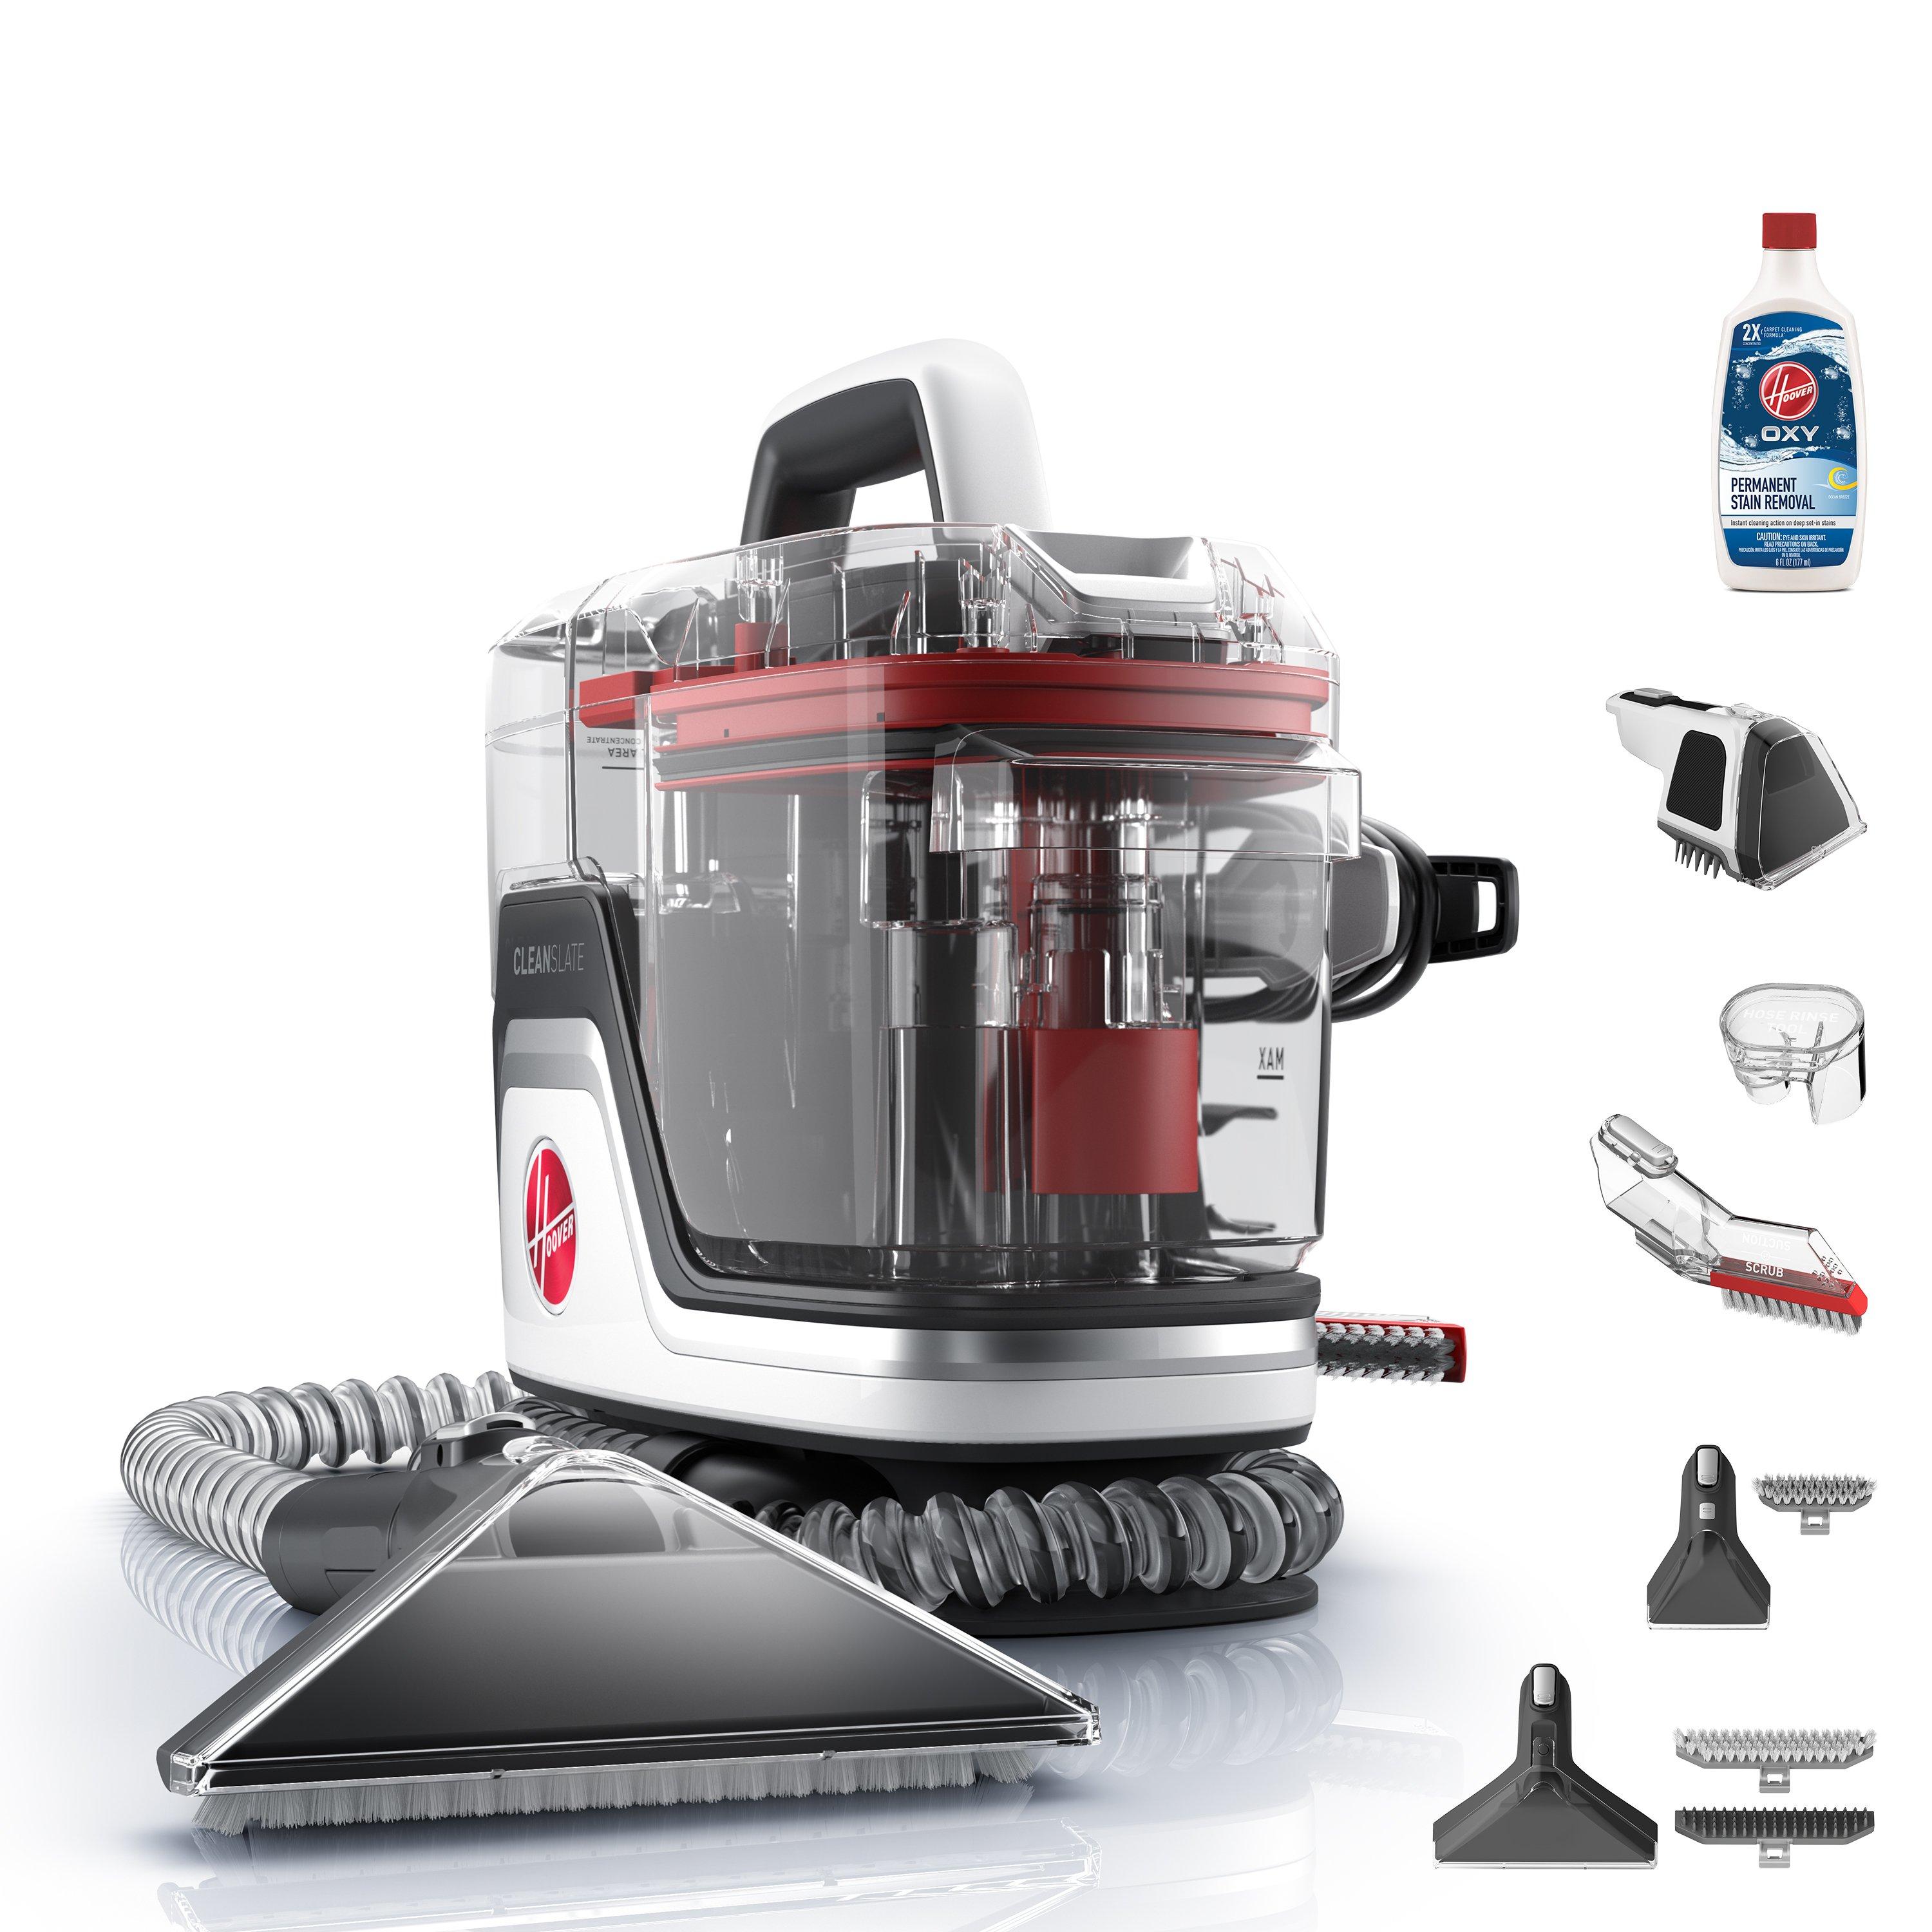 Hoover Cleanslate Pet Portable Carpet Cleaner Fh14000